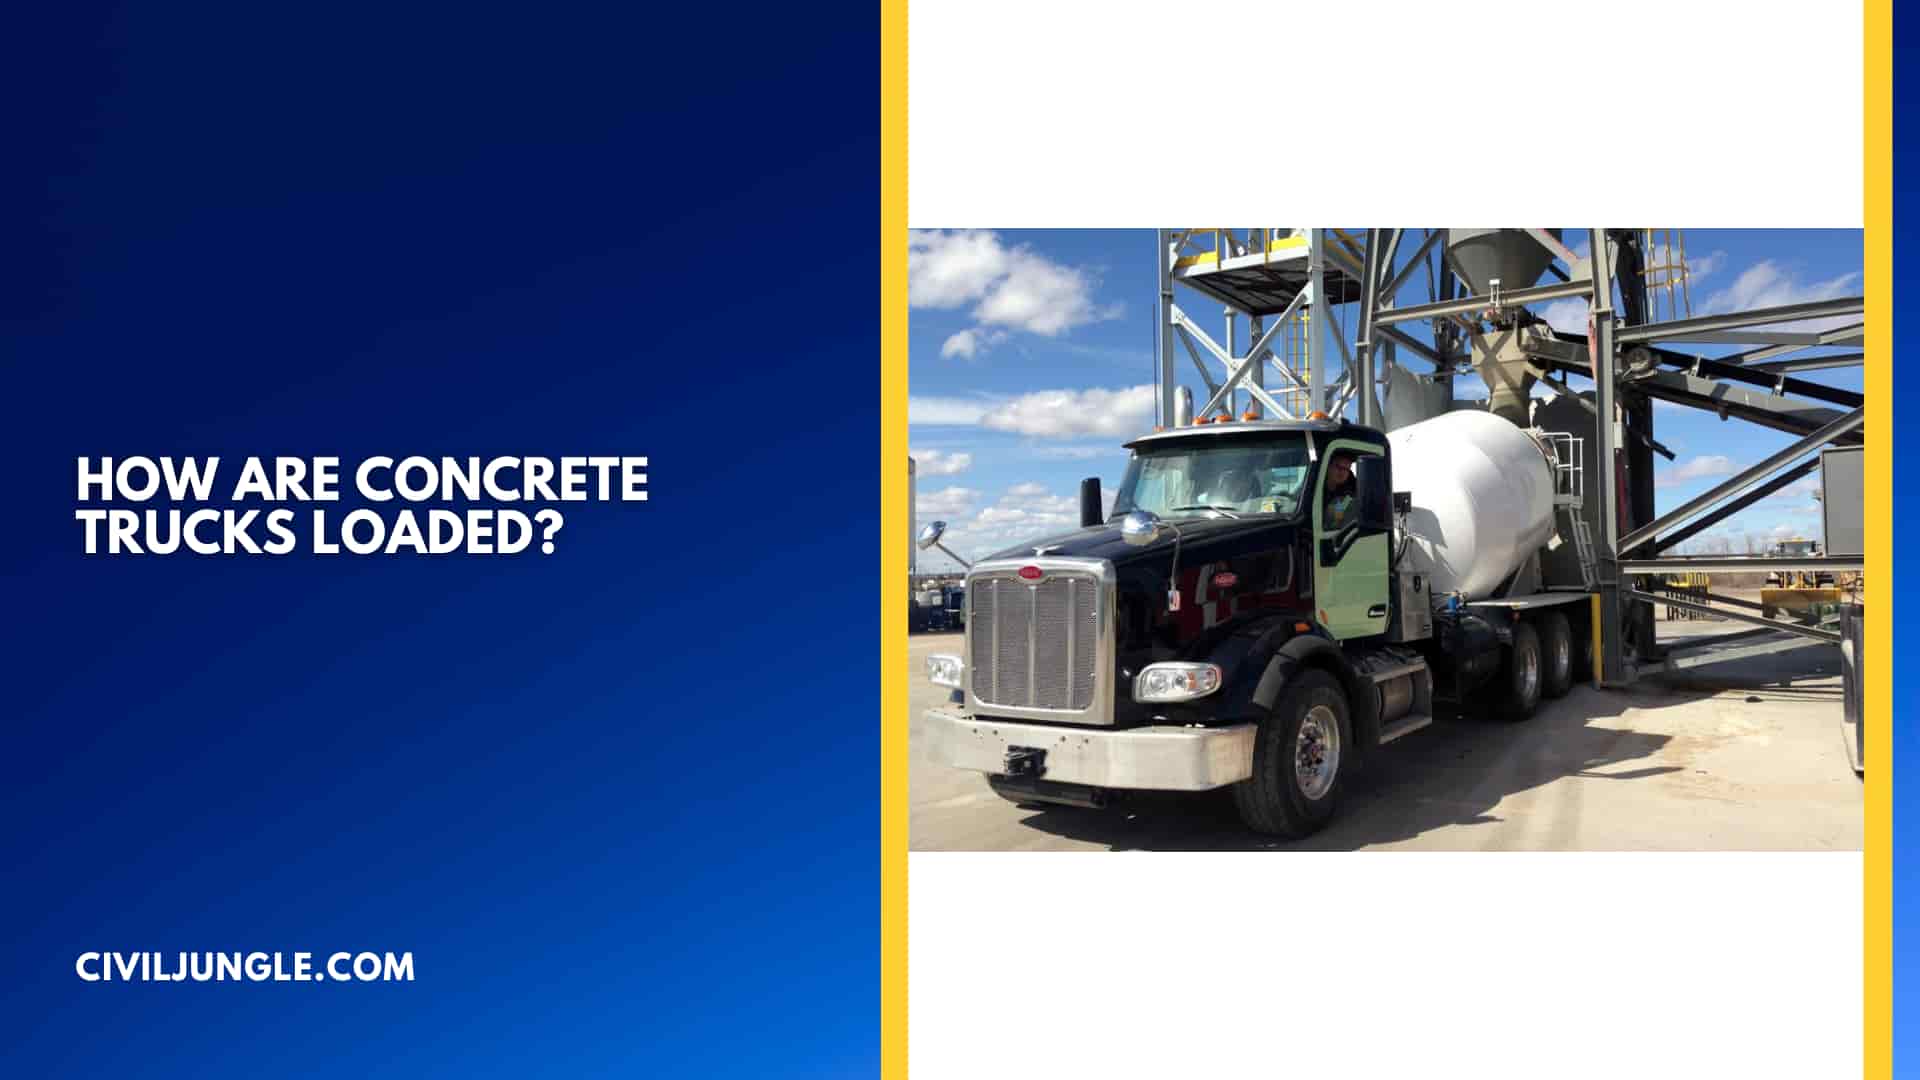 How are Concrete Trucks Loaded?